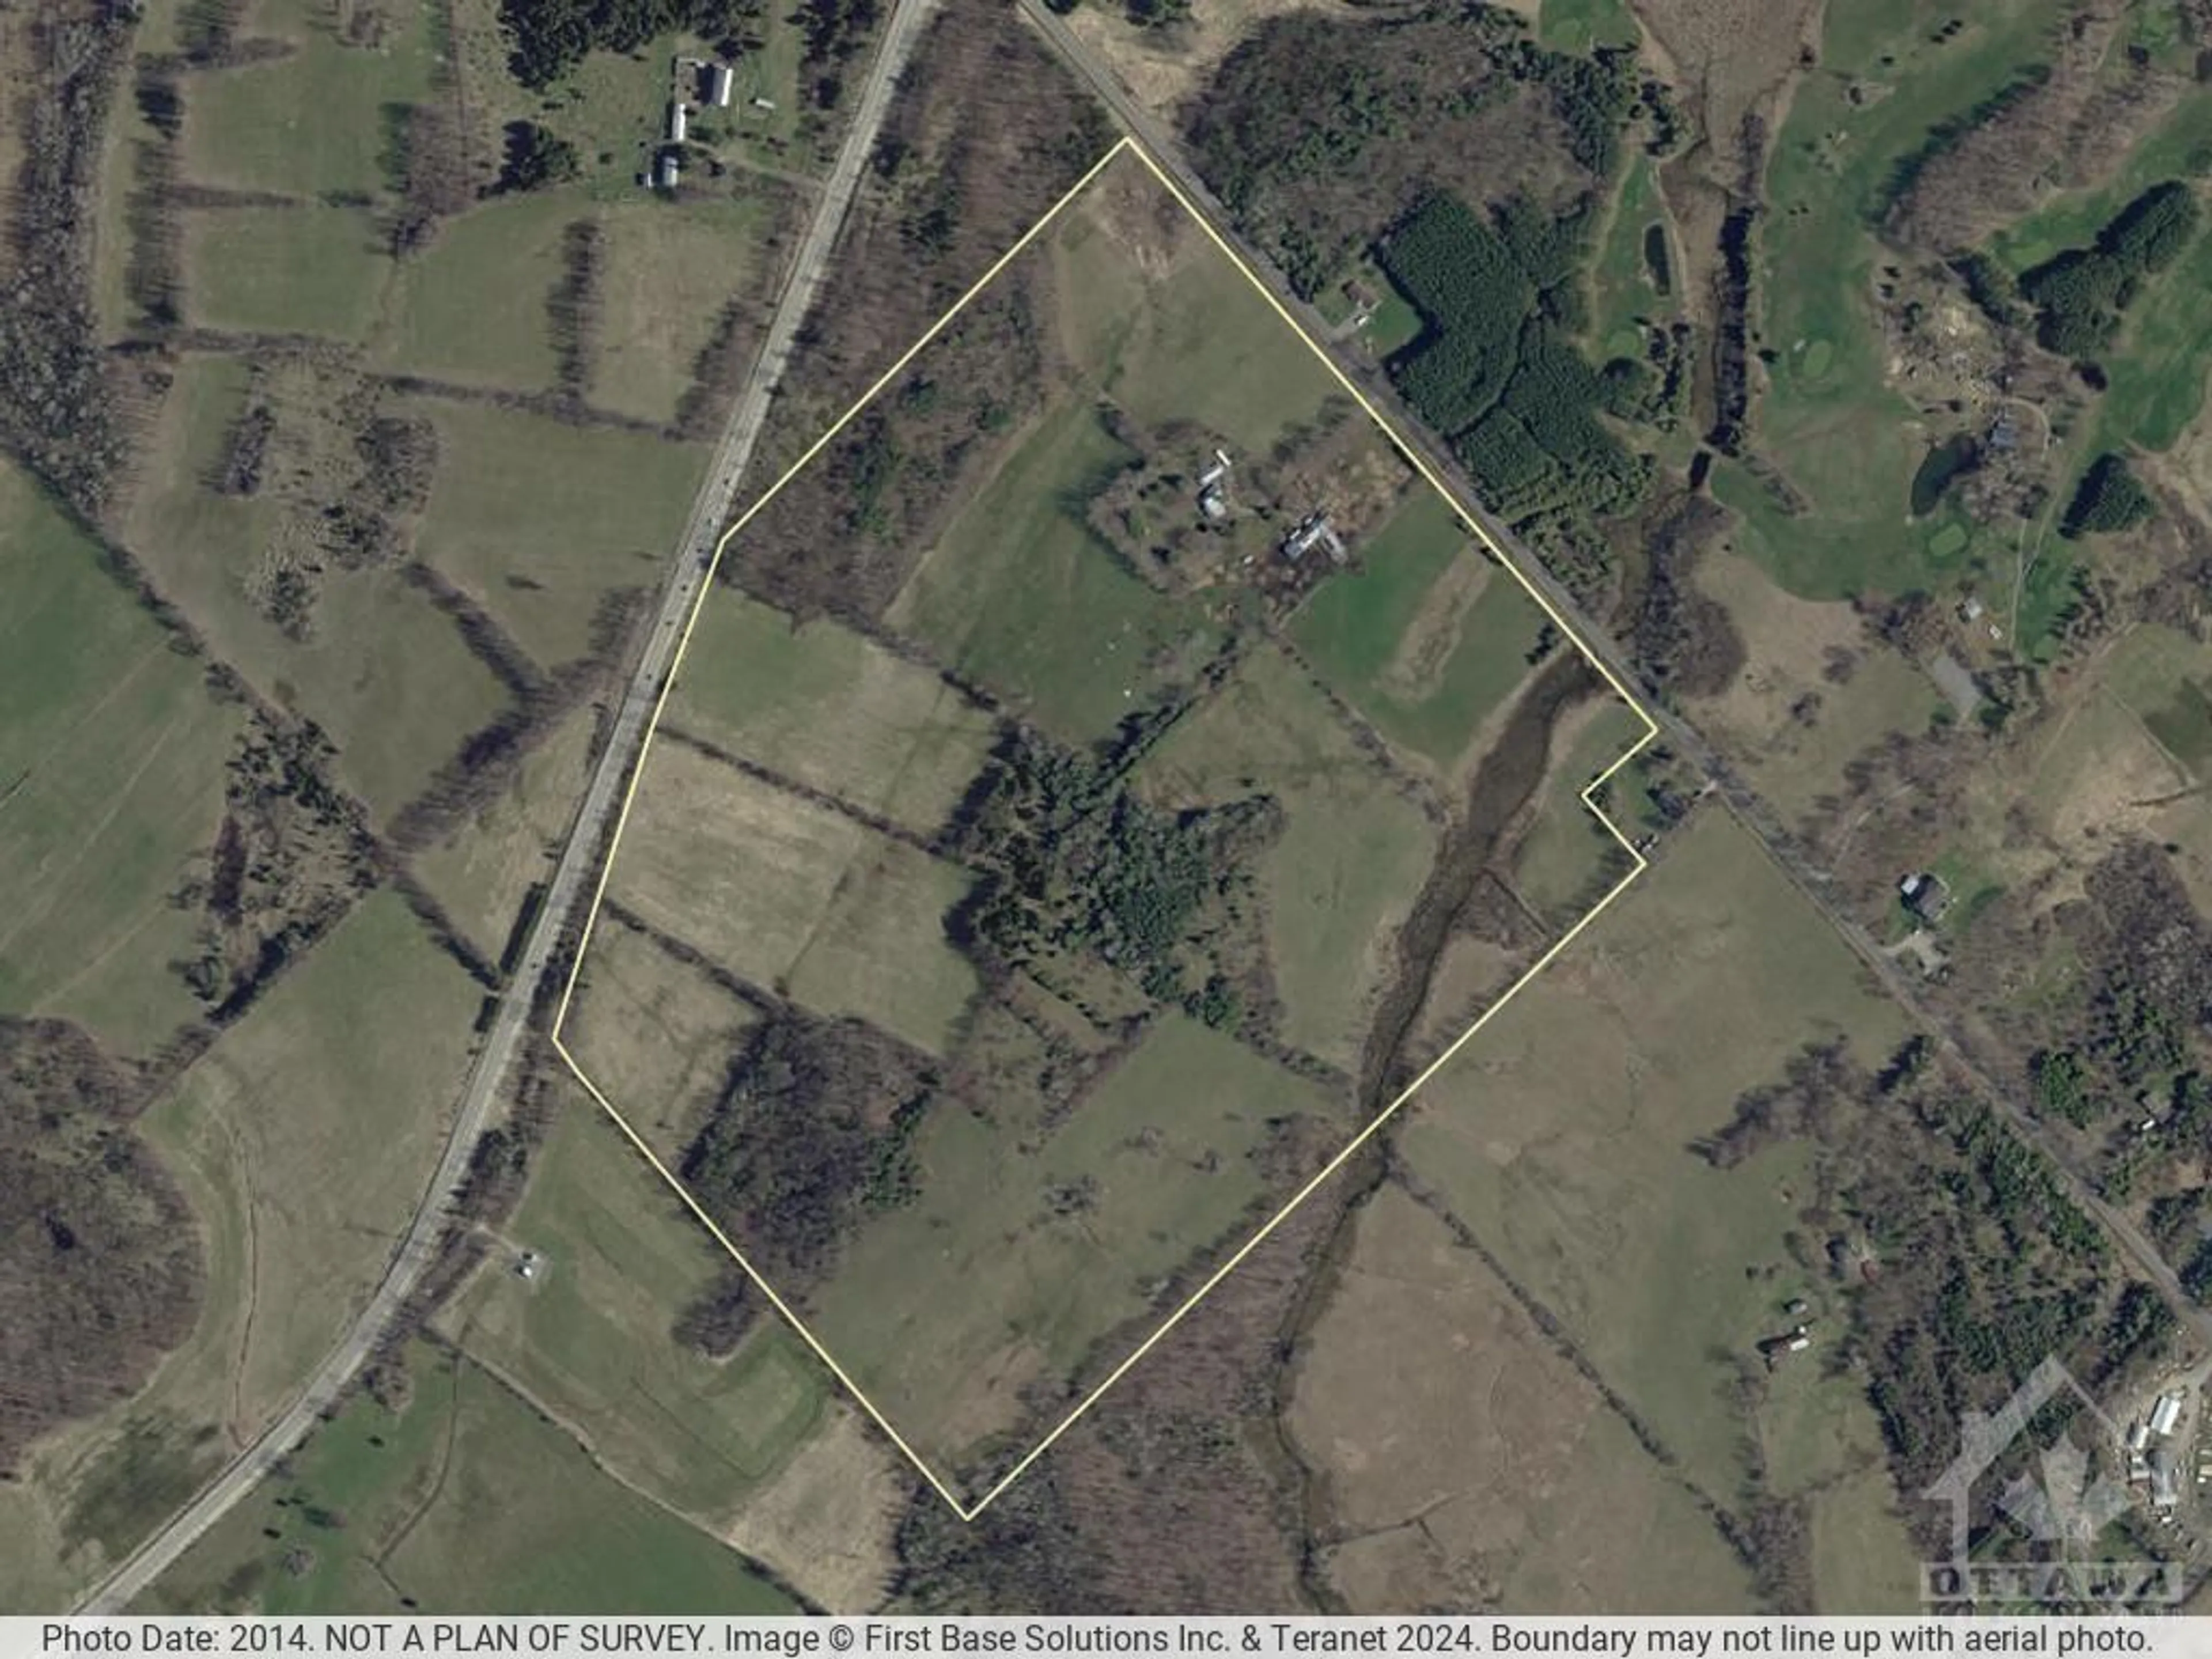 Picture of a map for 2091 SCOTCH CORNERS Rd, Carleton Place Ontario K7C 0C5